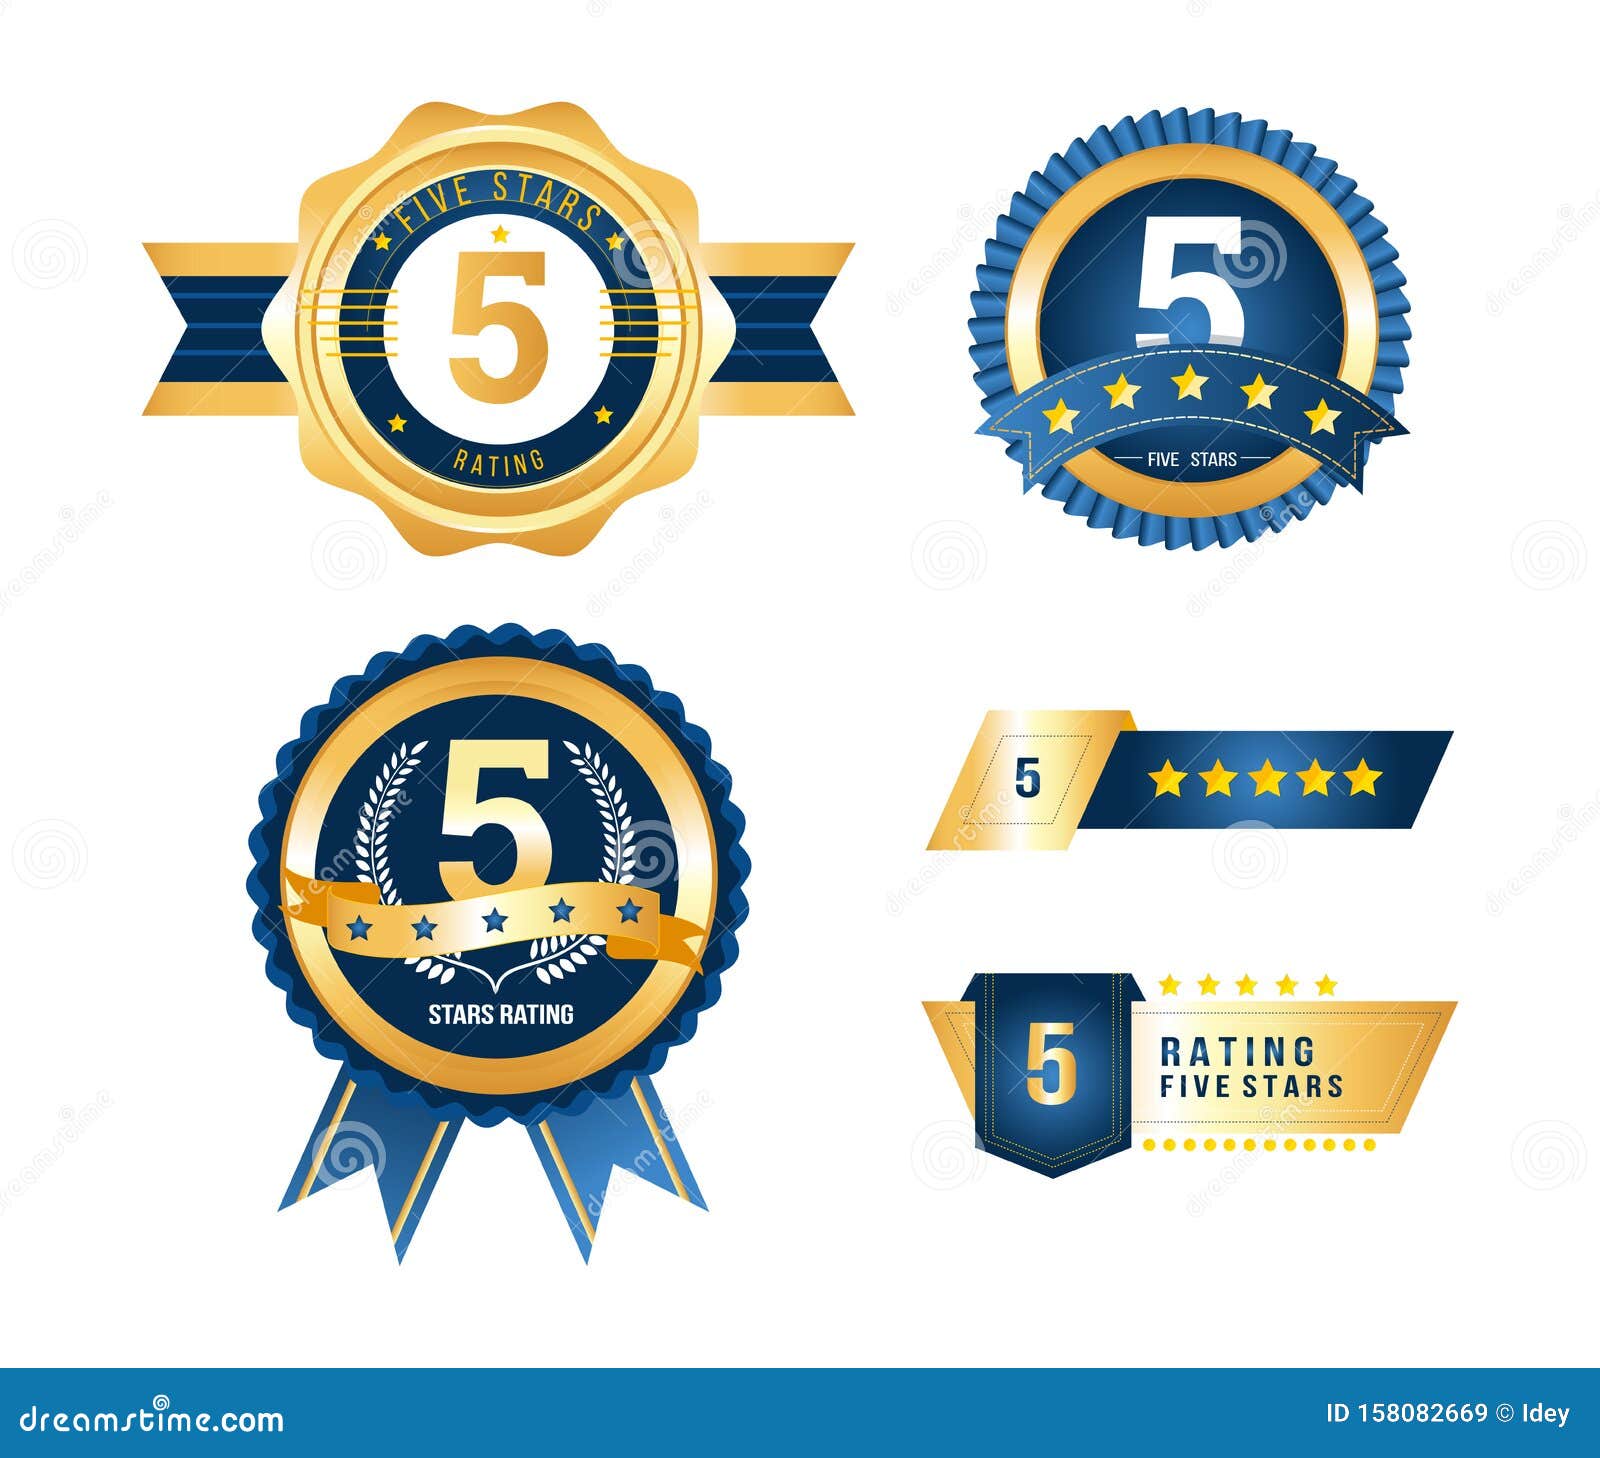 https://thumbs.dreamstime.com/z/luxury-gold-badges-quality-labels-premium-set-stars-rating-rating-stamp-badge-concept-feedback-reviews-voting-collecting-158082669.jpg